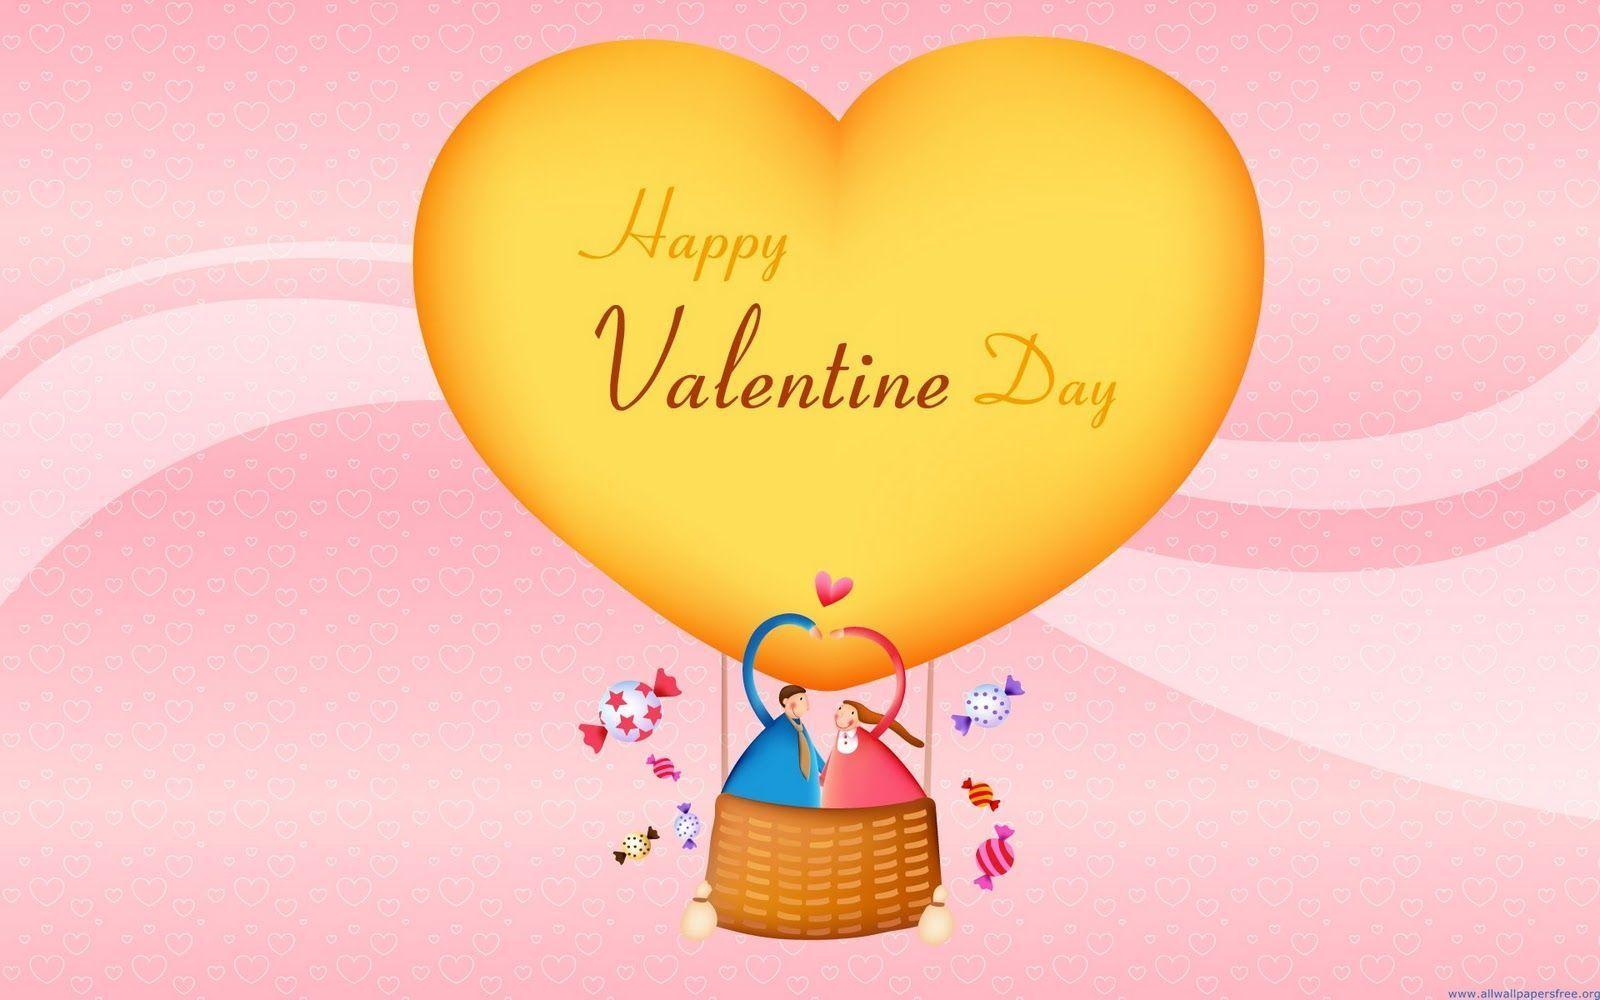 Beautiful Valentine&;s Day HQ Image For E Cards Or Wallpaper